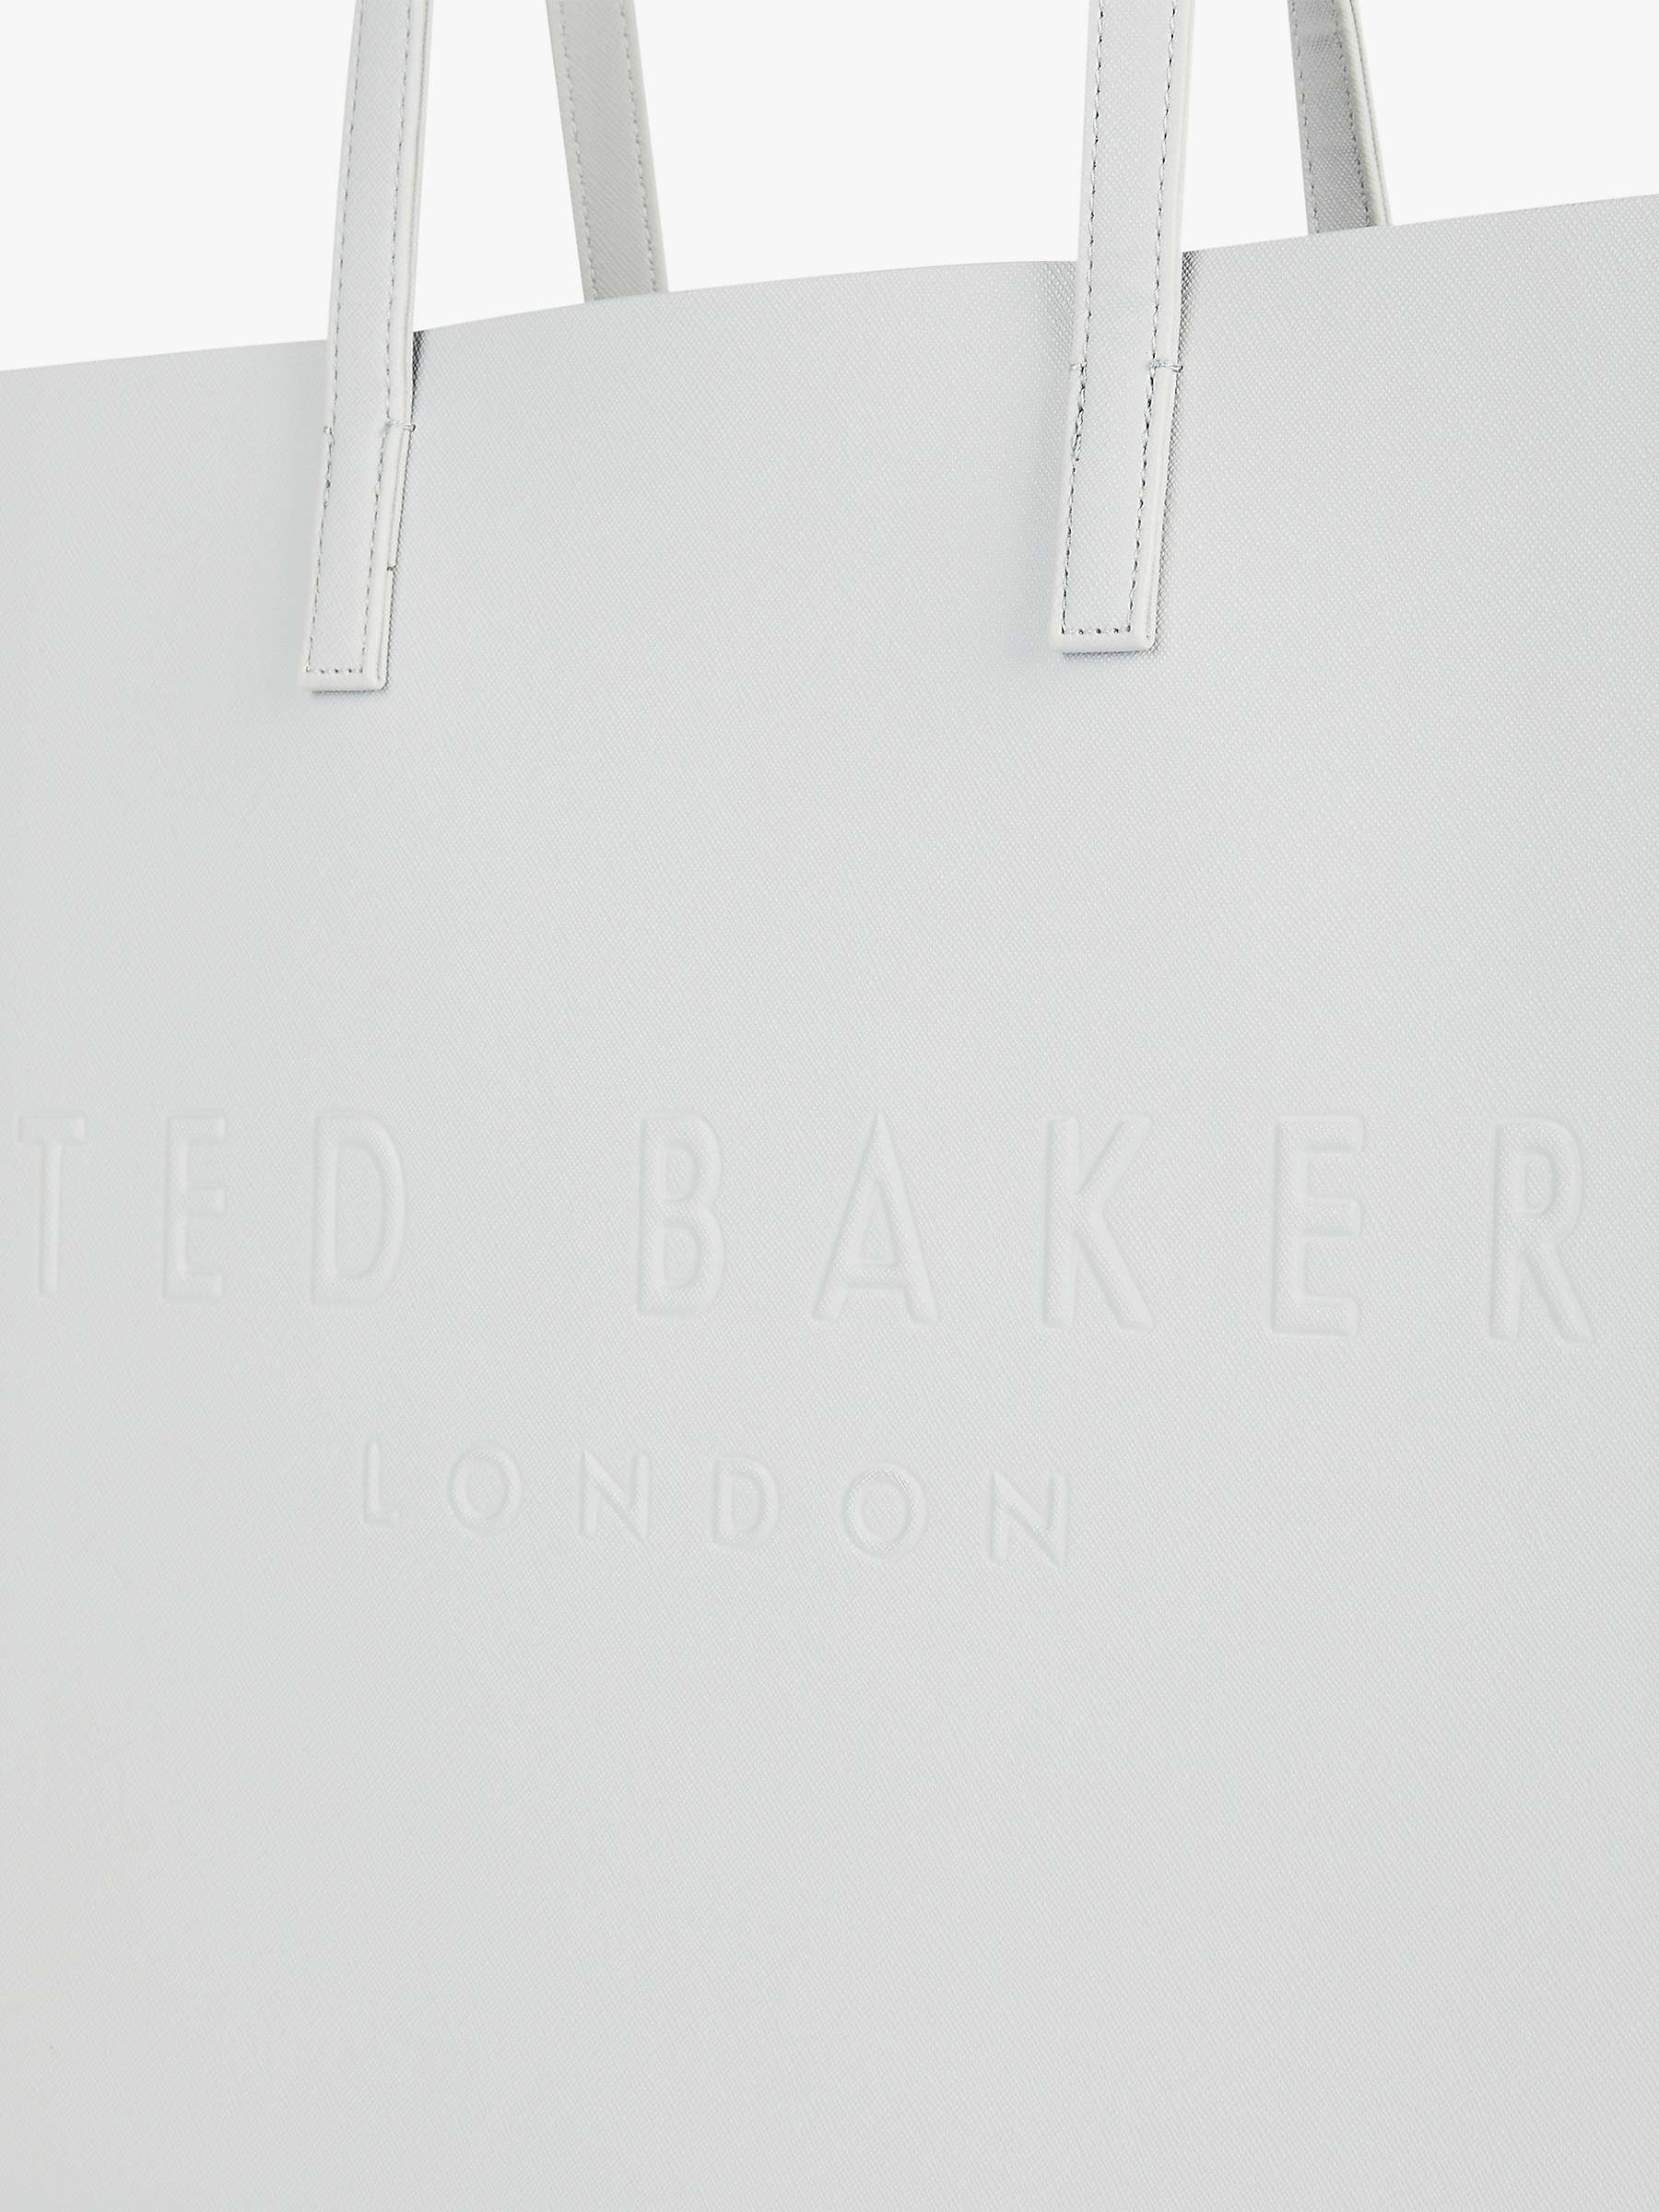 Buy Ted Baker Sukicon Large Icon Shopper Bag Online at johnlewis.com